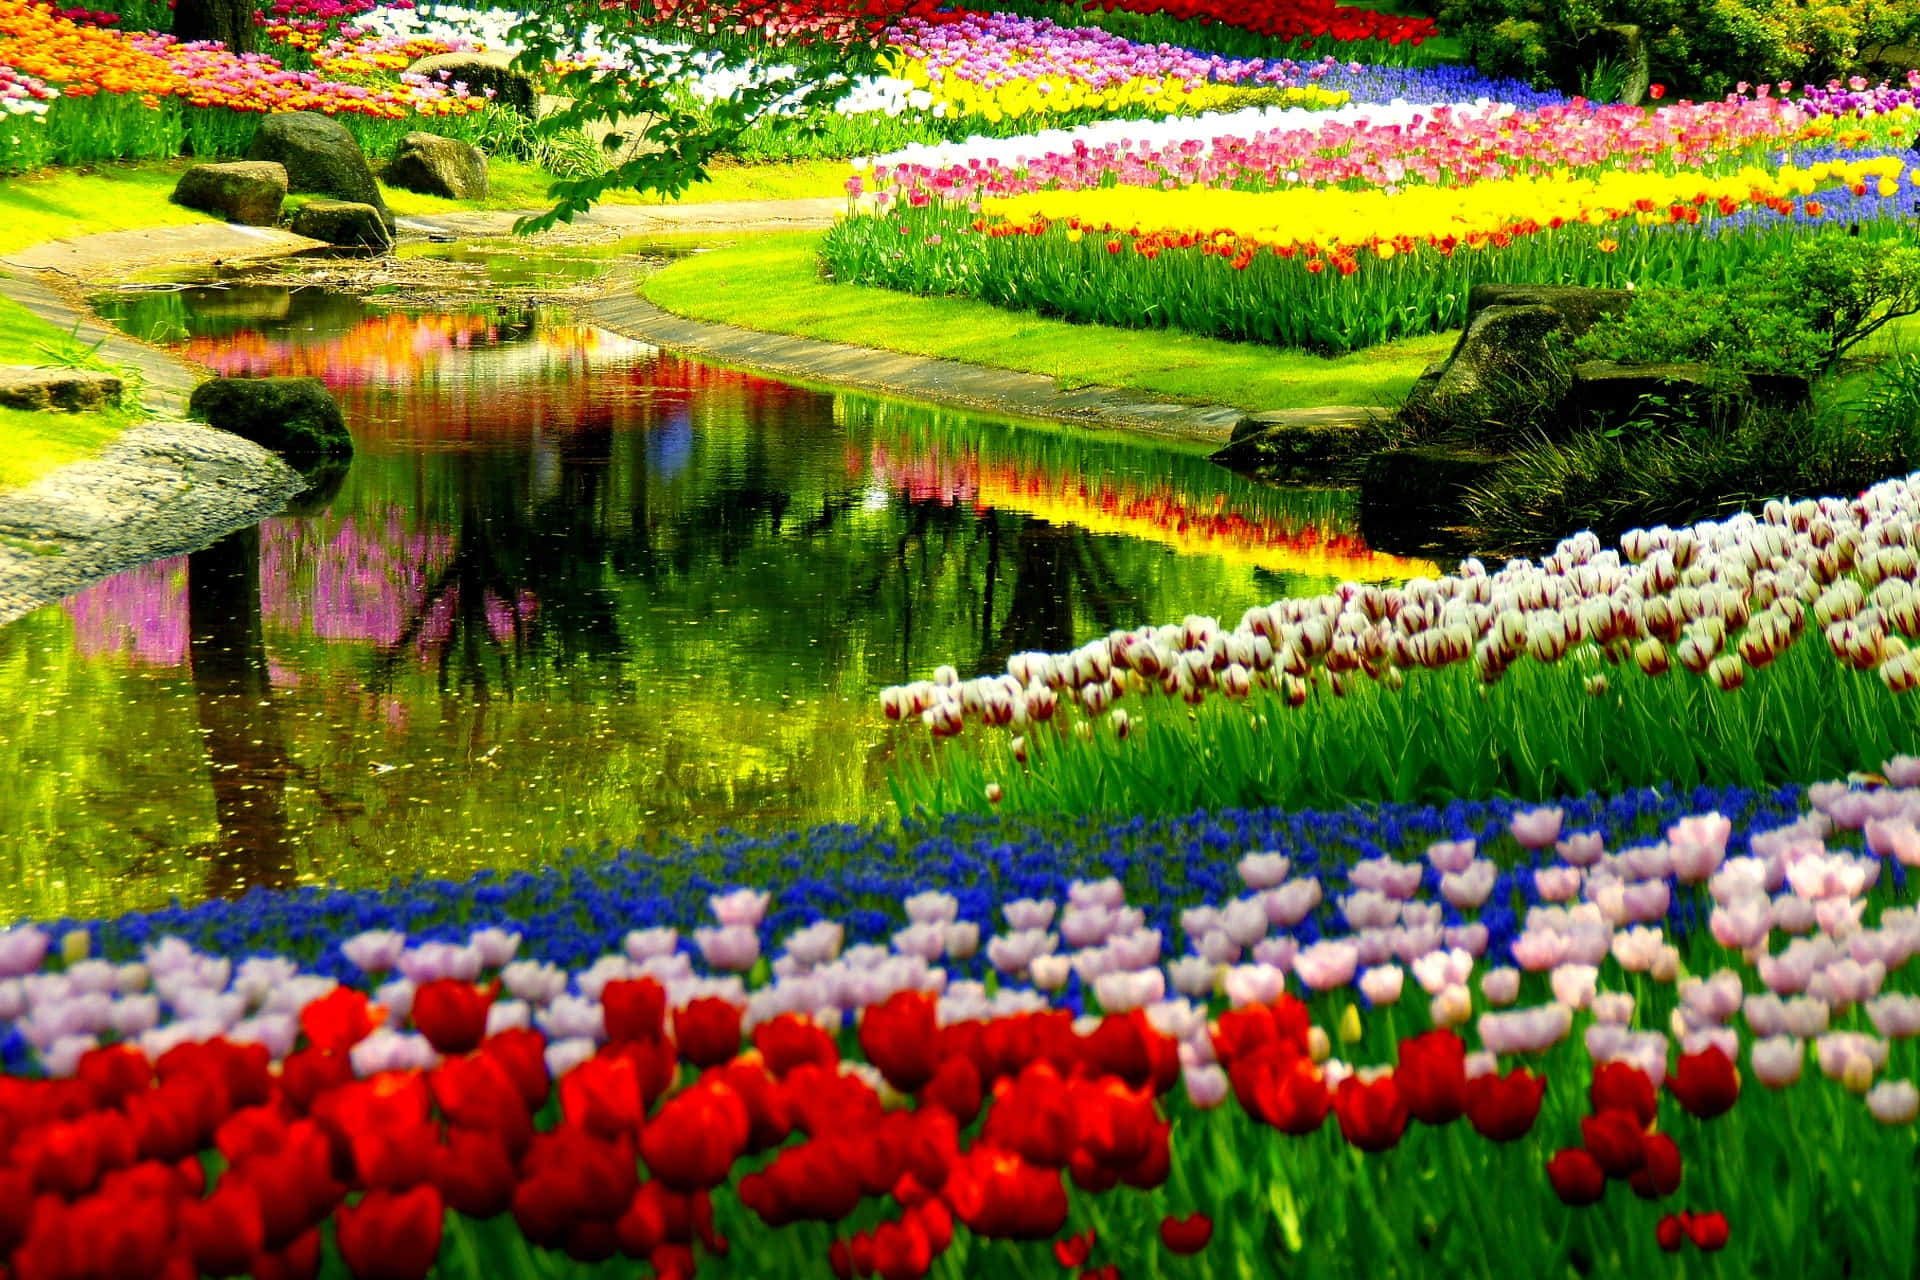 Enjoy the beauty of spring time with colorful flowers and vibrant colors in nature.